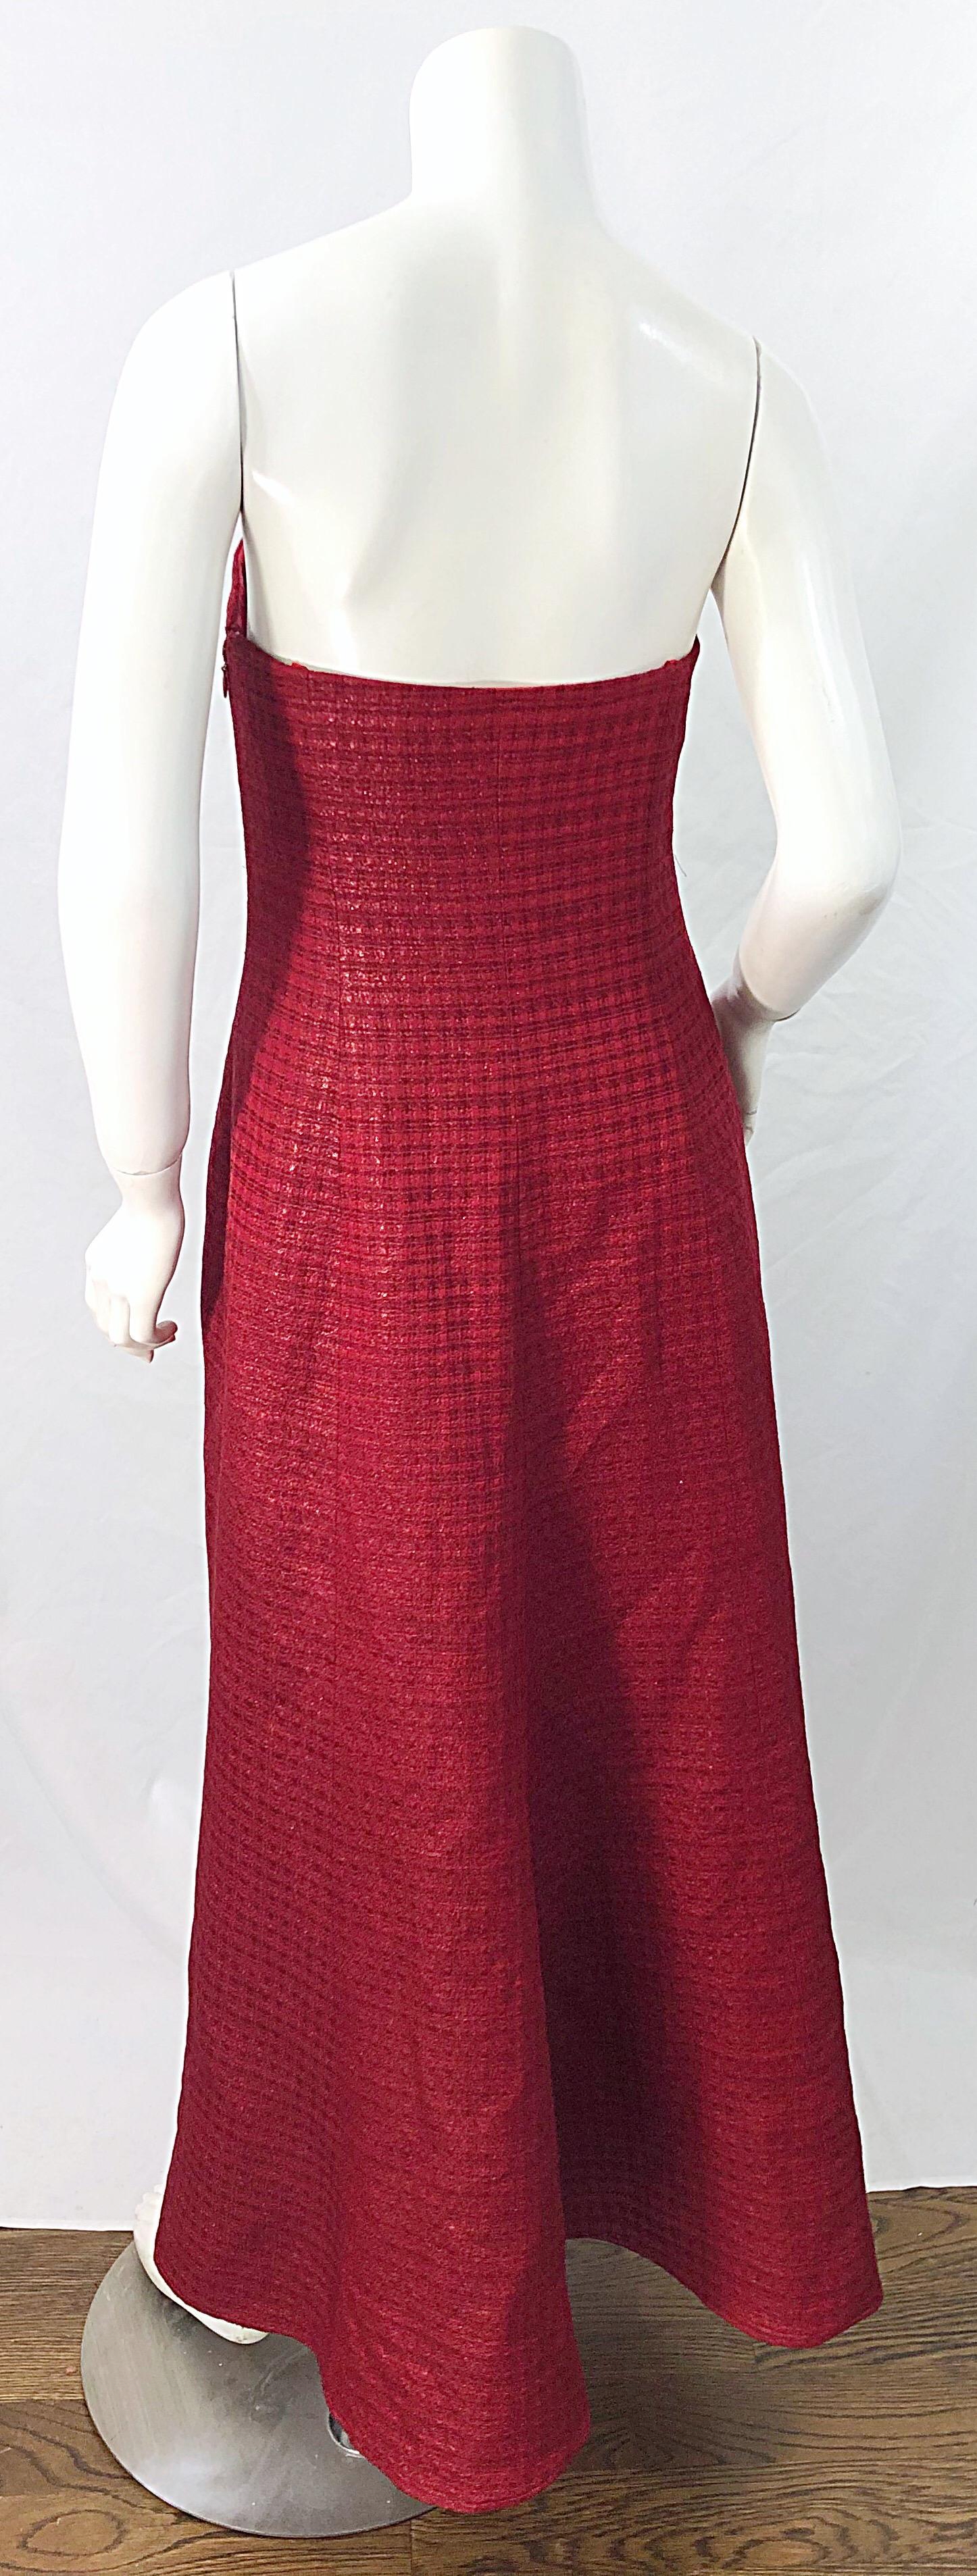 1990s Louis Feraud Cranberry Red Strapless Vintage 90s Silk + Wool Gown Dress For Sale 2